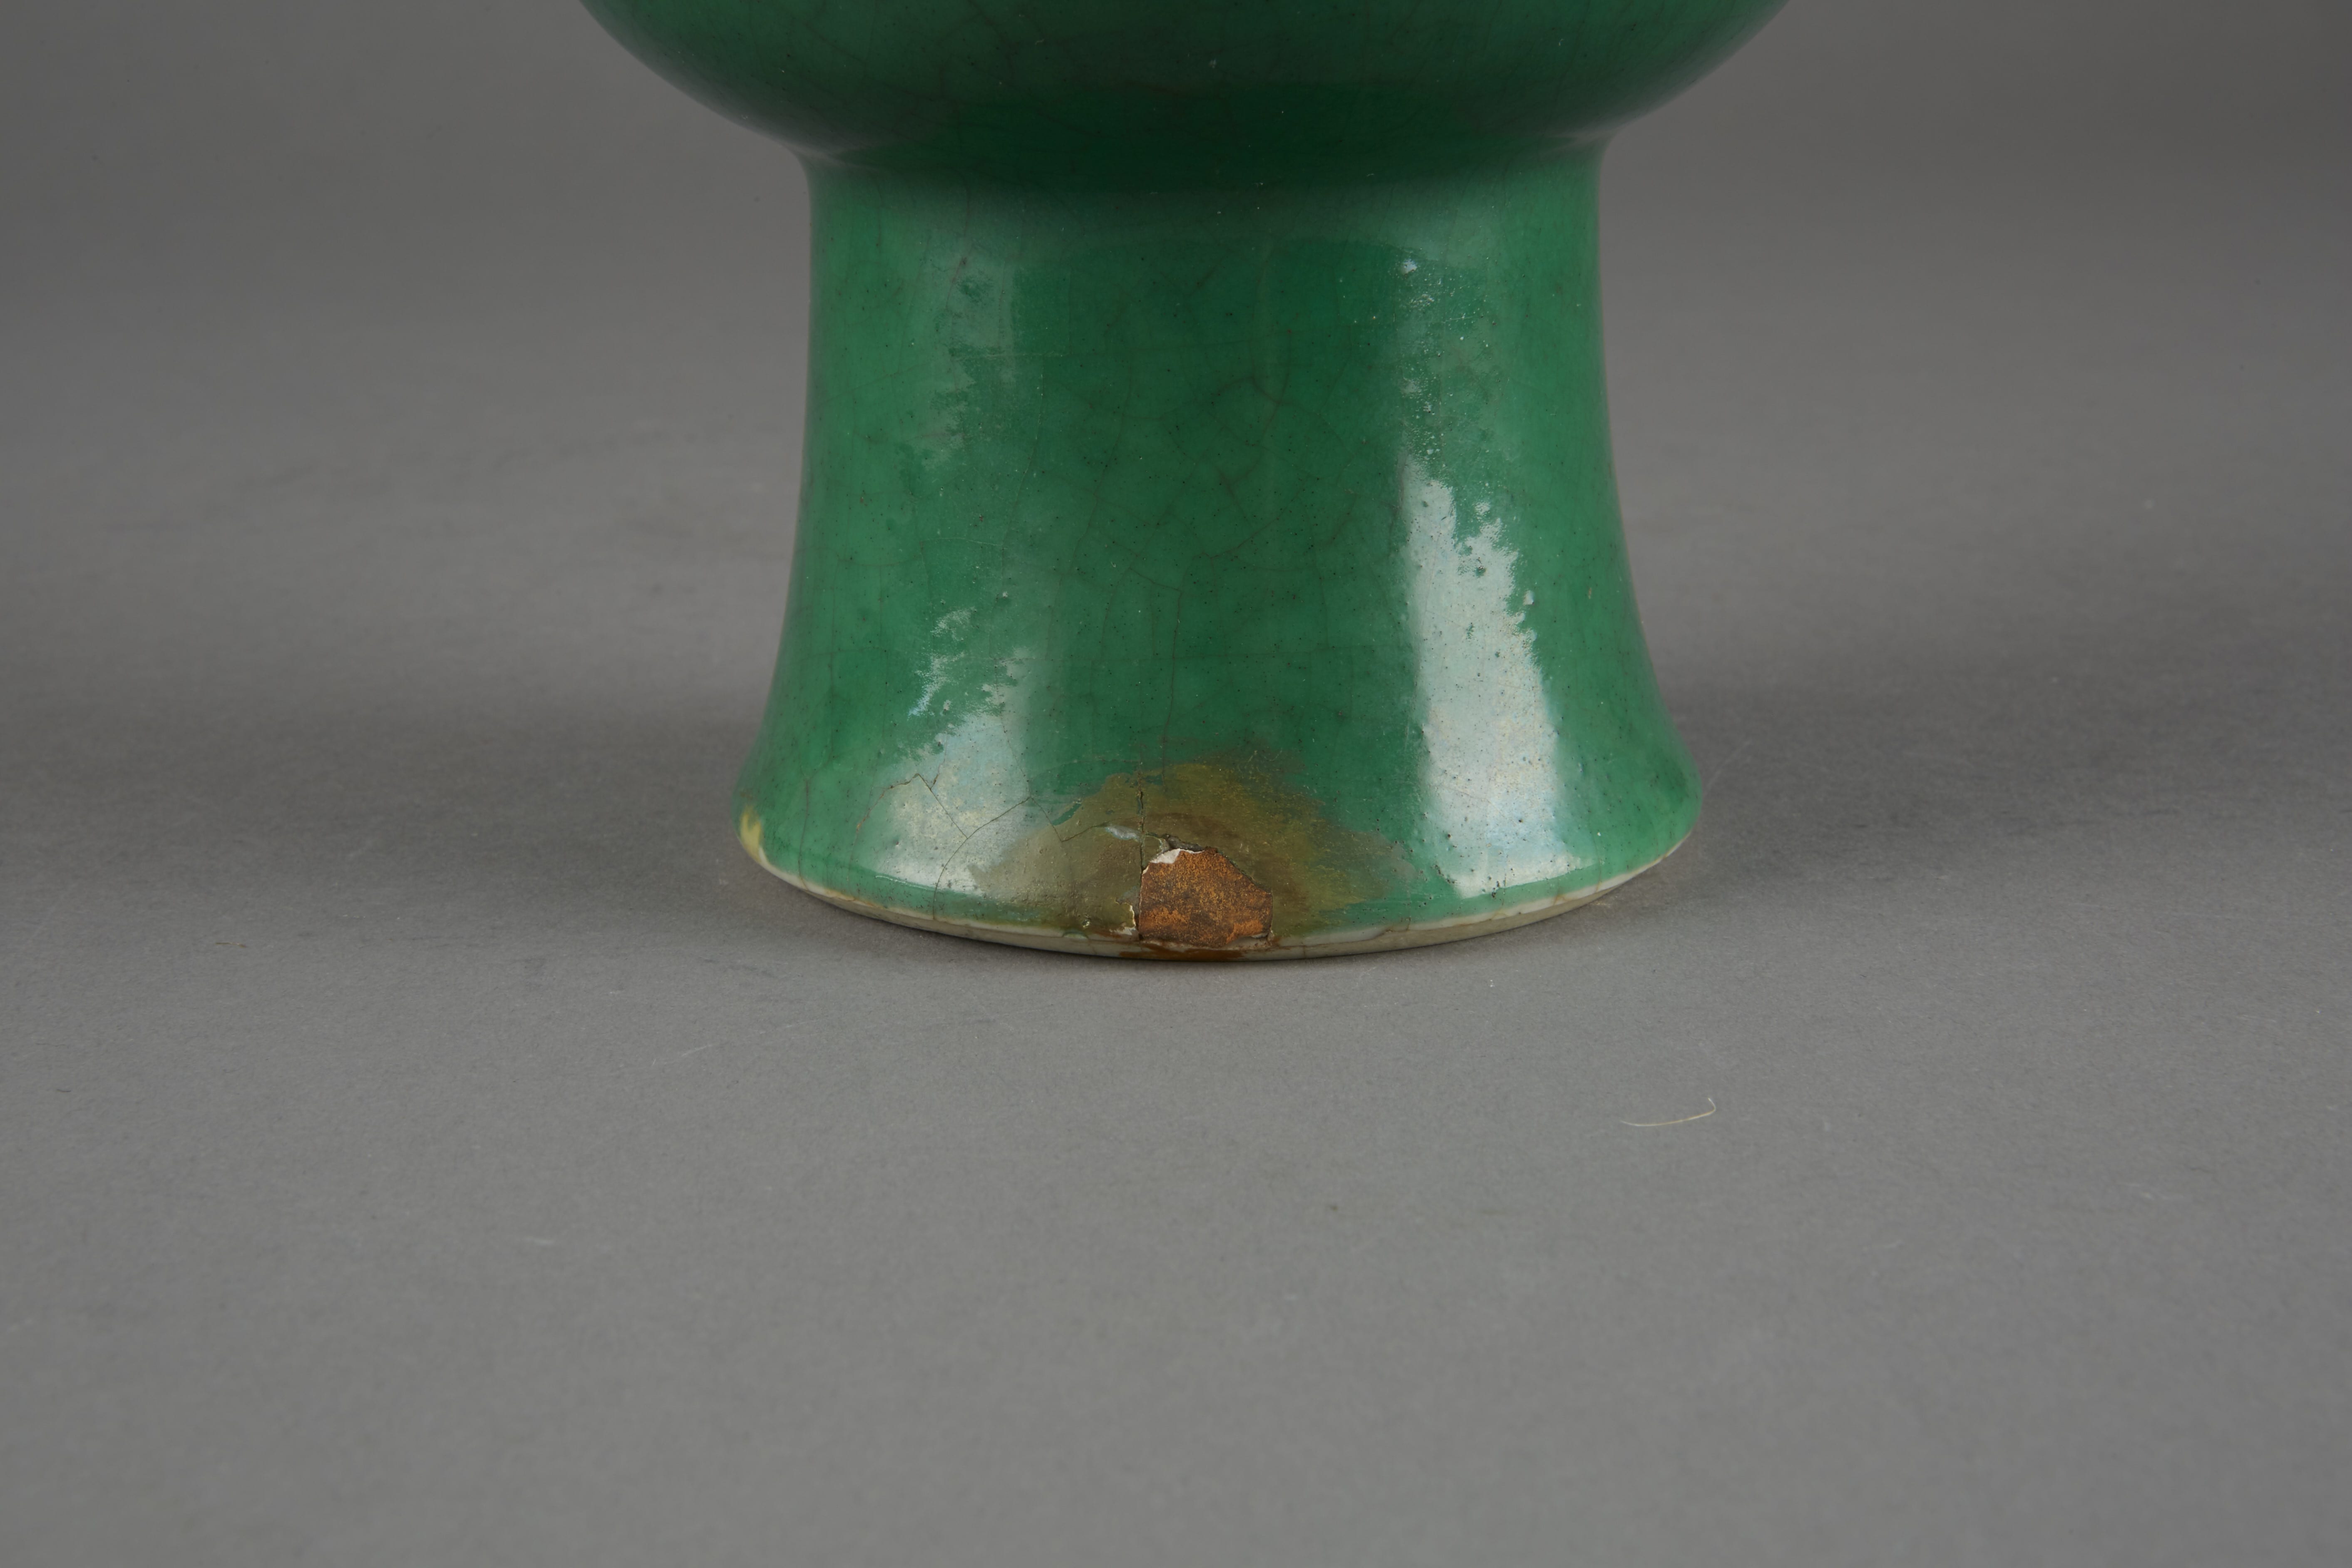 Lot 099: Chinese 19th century bright green Crackle Porcelain Vase With Lion Handles